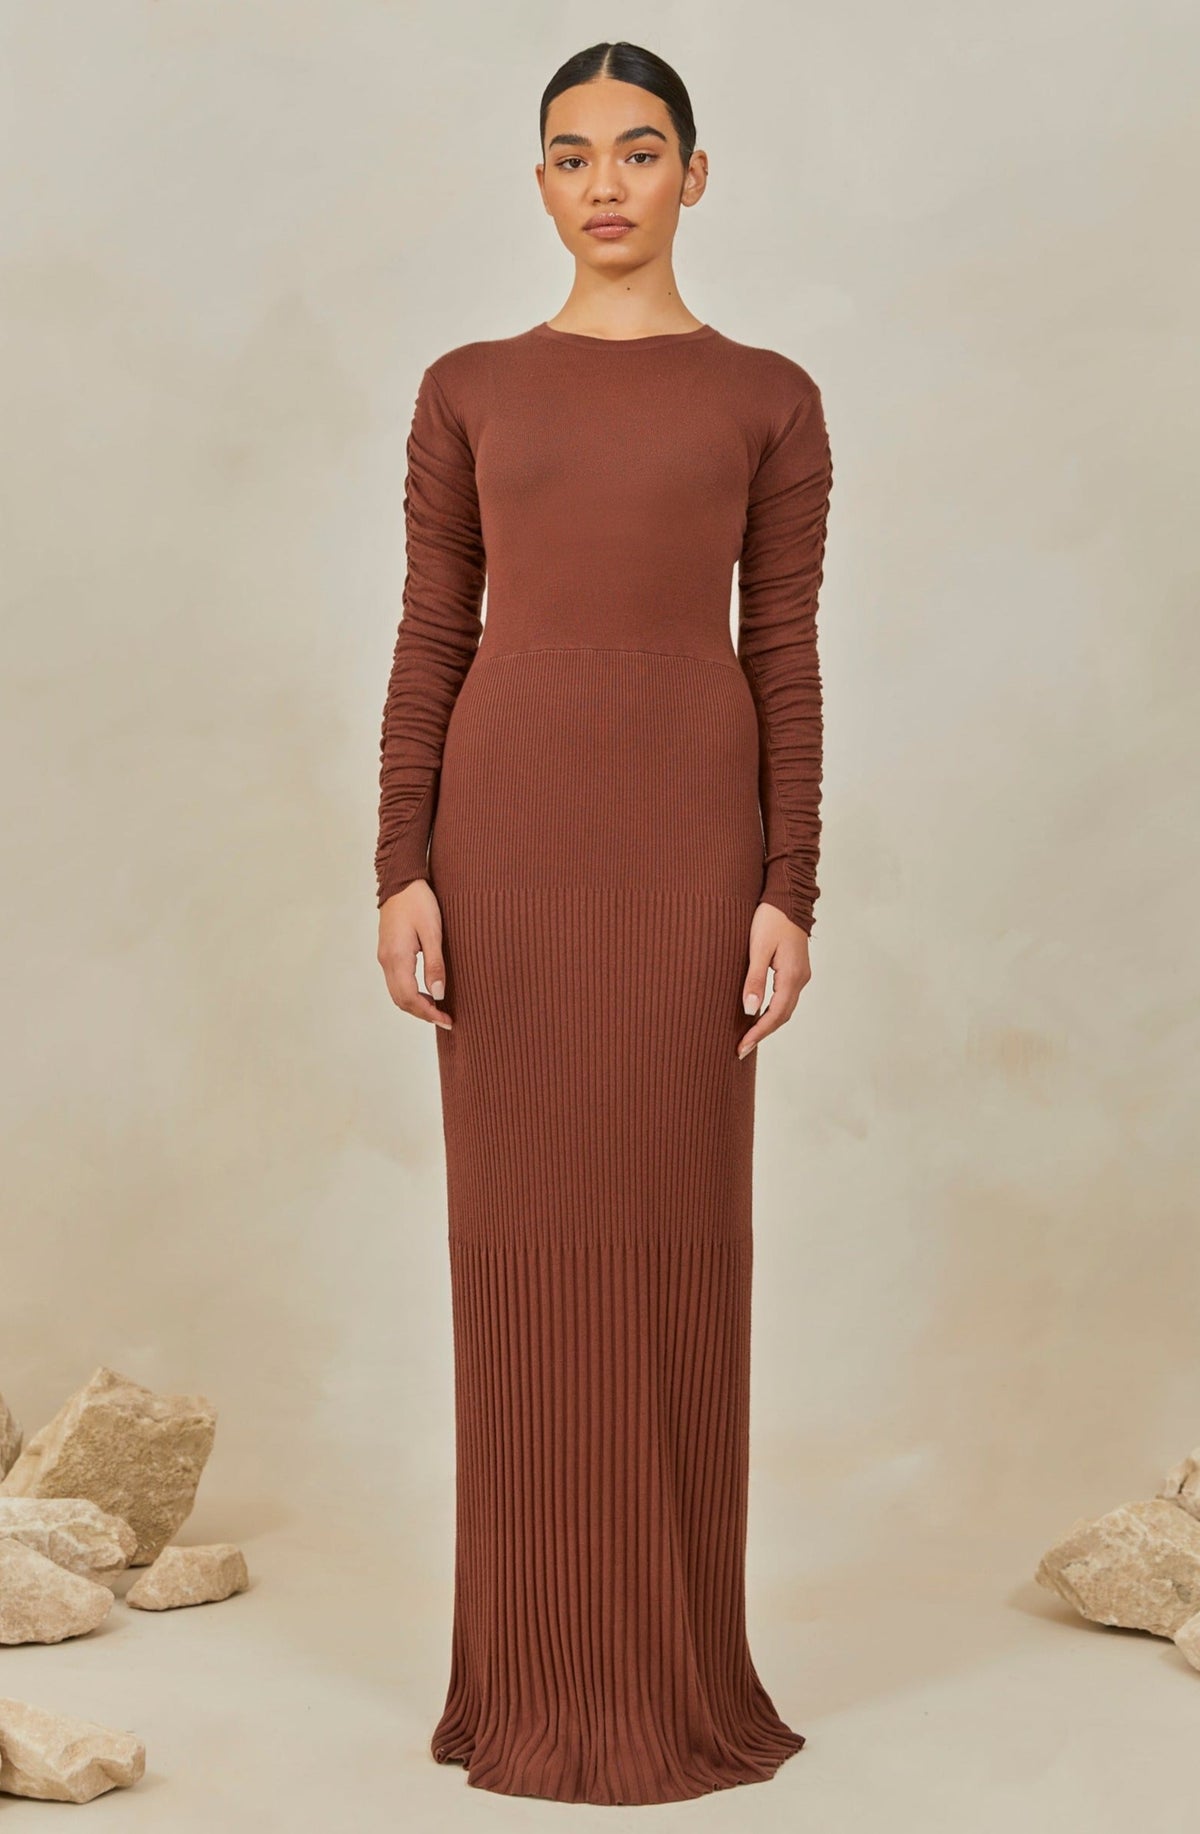 Rouched Sleeve Knit Maxi Dress - Chocolate Brown epschoolboard 